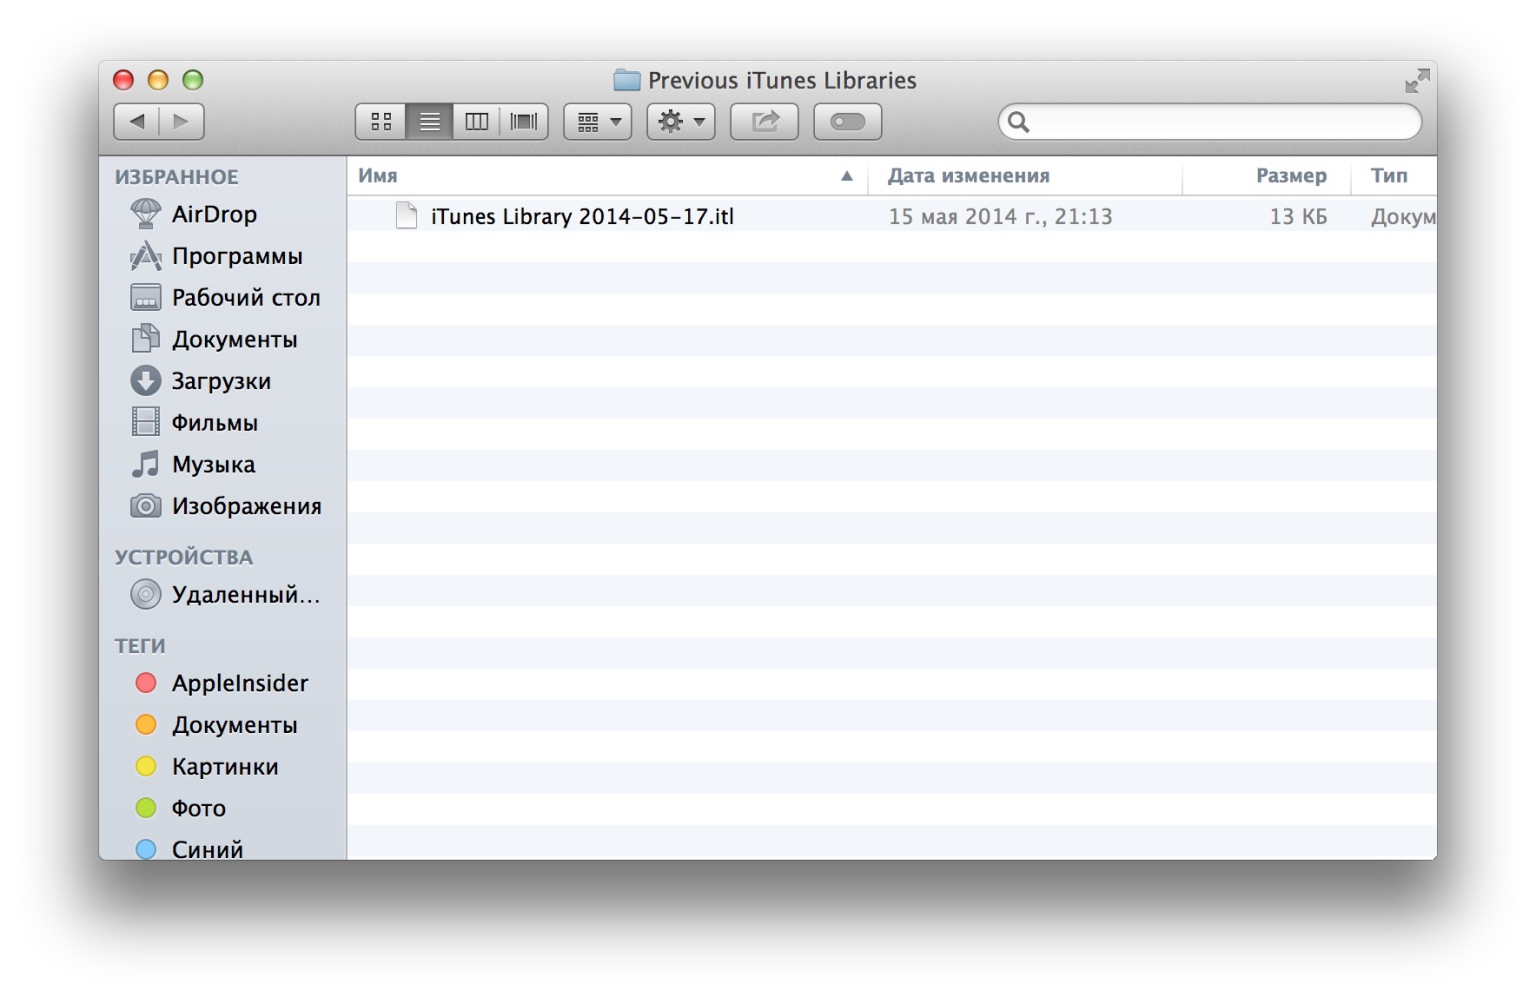 ITUNES общий доступ к файлам. File ITUNES Library ITL cannot be read. Файл itunes library